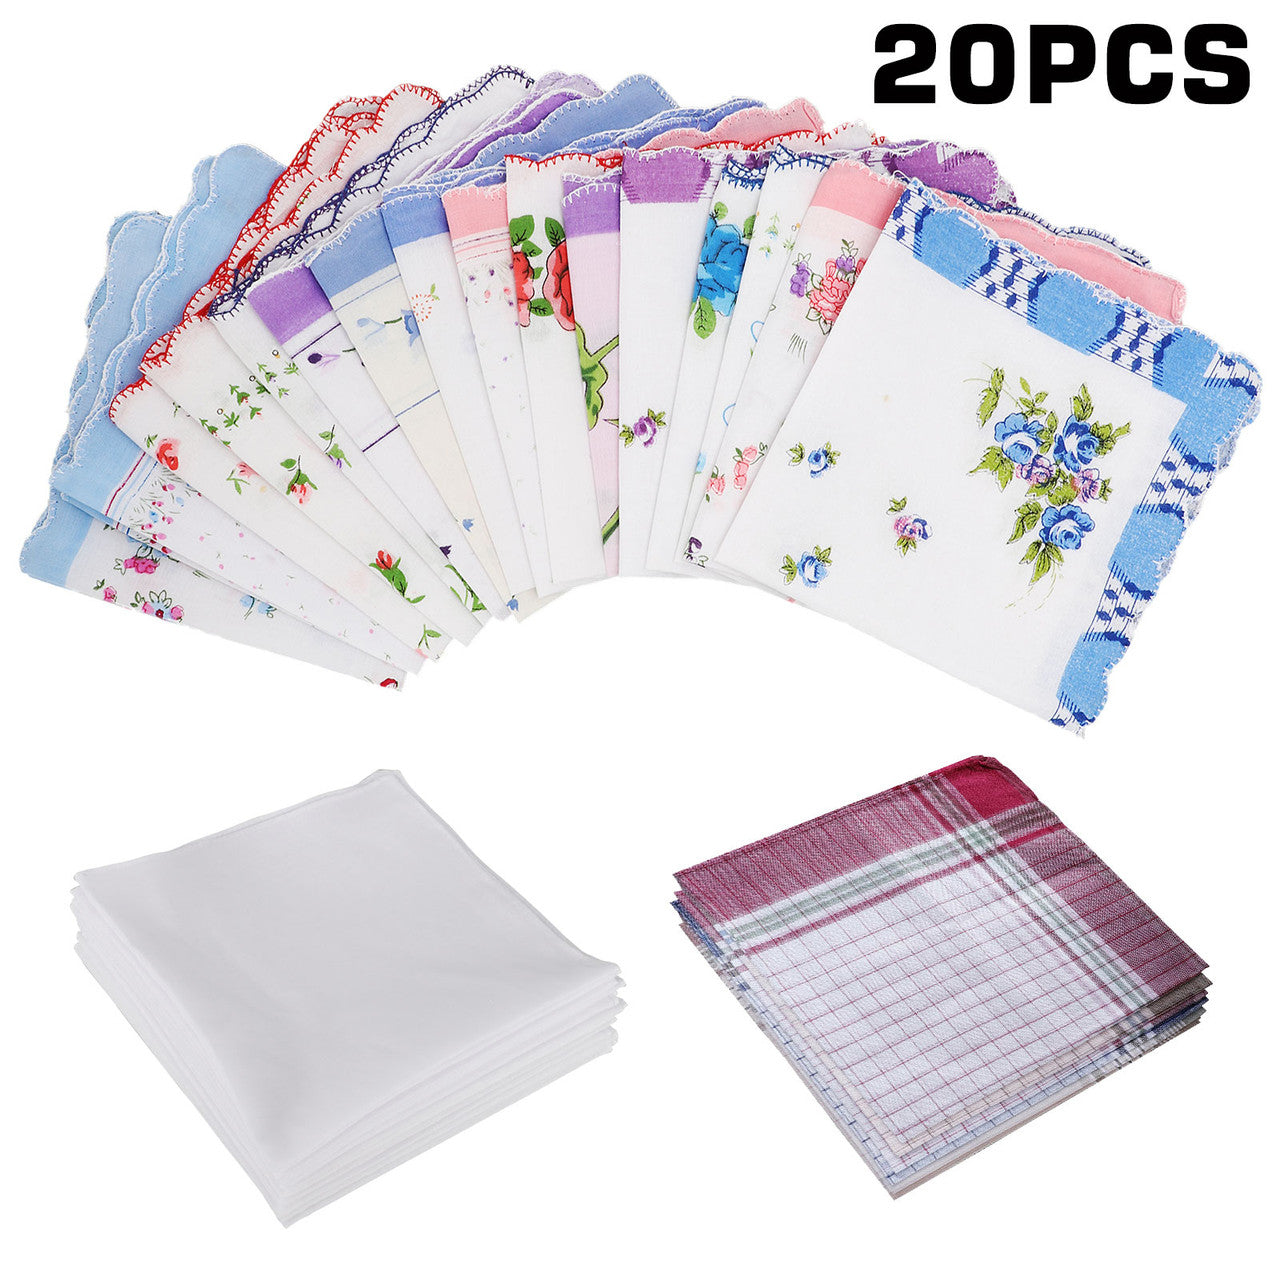 Women's Handkerchiefs, Colorful Printing Floral Ladies Handkerchiefs, 100% Cotton Classic, Pure Cotton Square Sheets, 20 Pieces